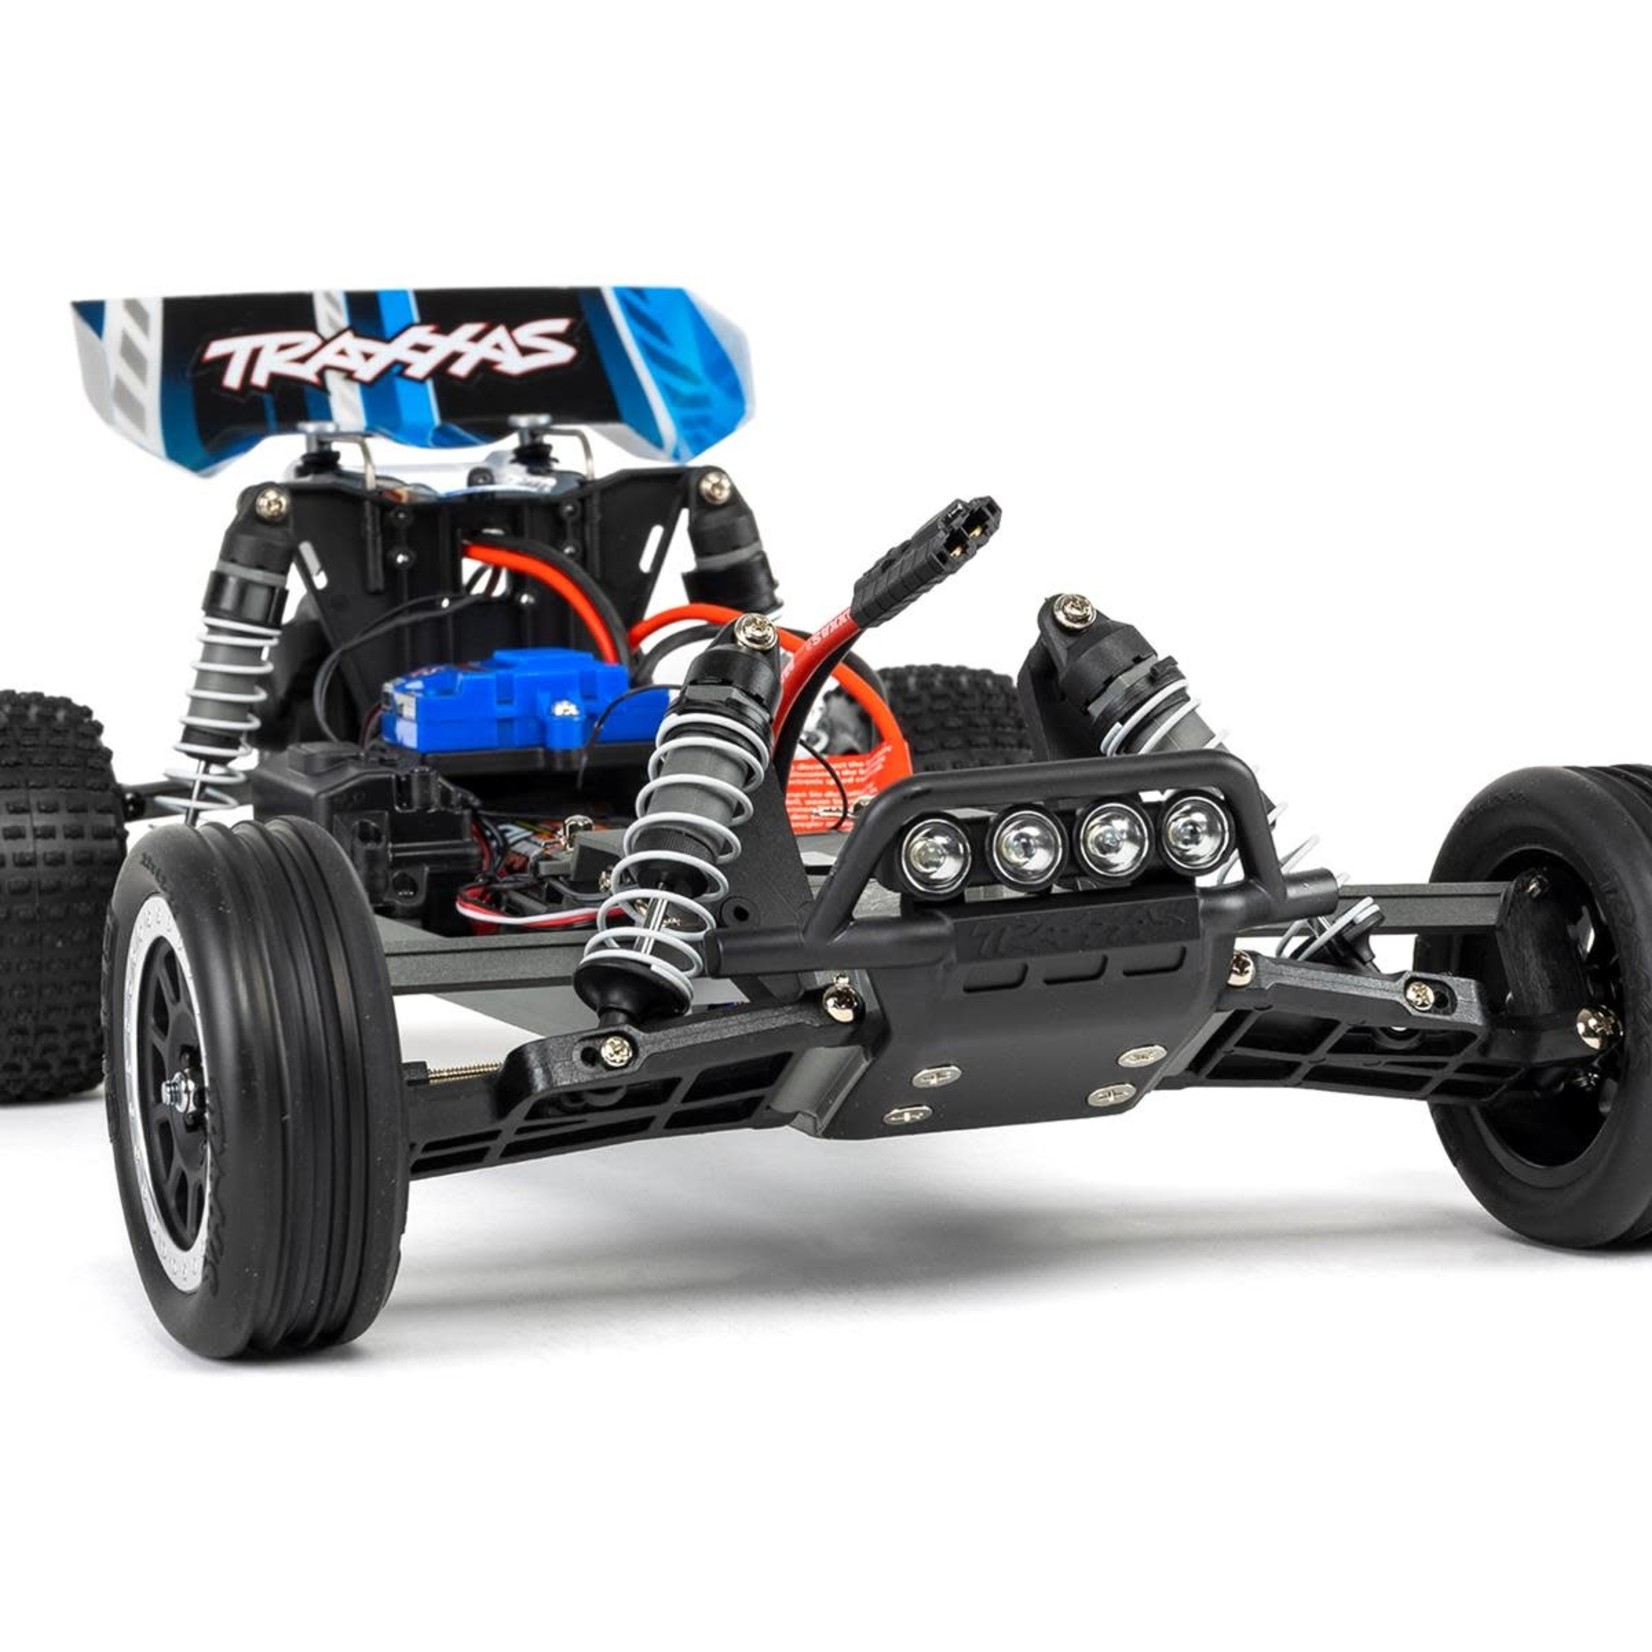 Traxxas Traxxas Bandit 1/10 RTR 2WD Electric Buggy w/LED Lights (Orange) w/XL-5 ESC, TQ 2.4GHz Radio, Battery & DC Charger #24054-61-ORNG